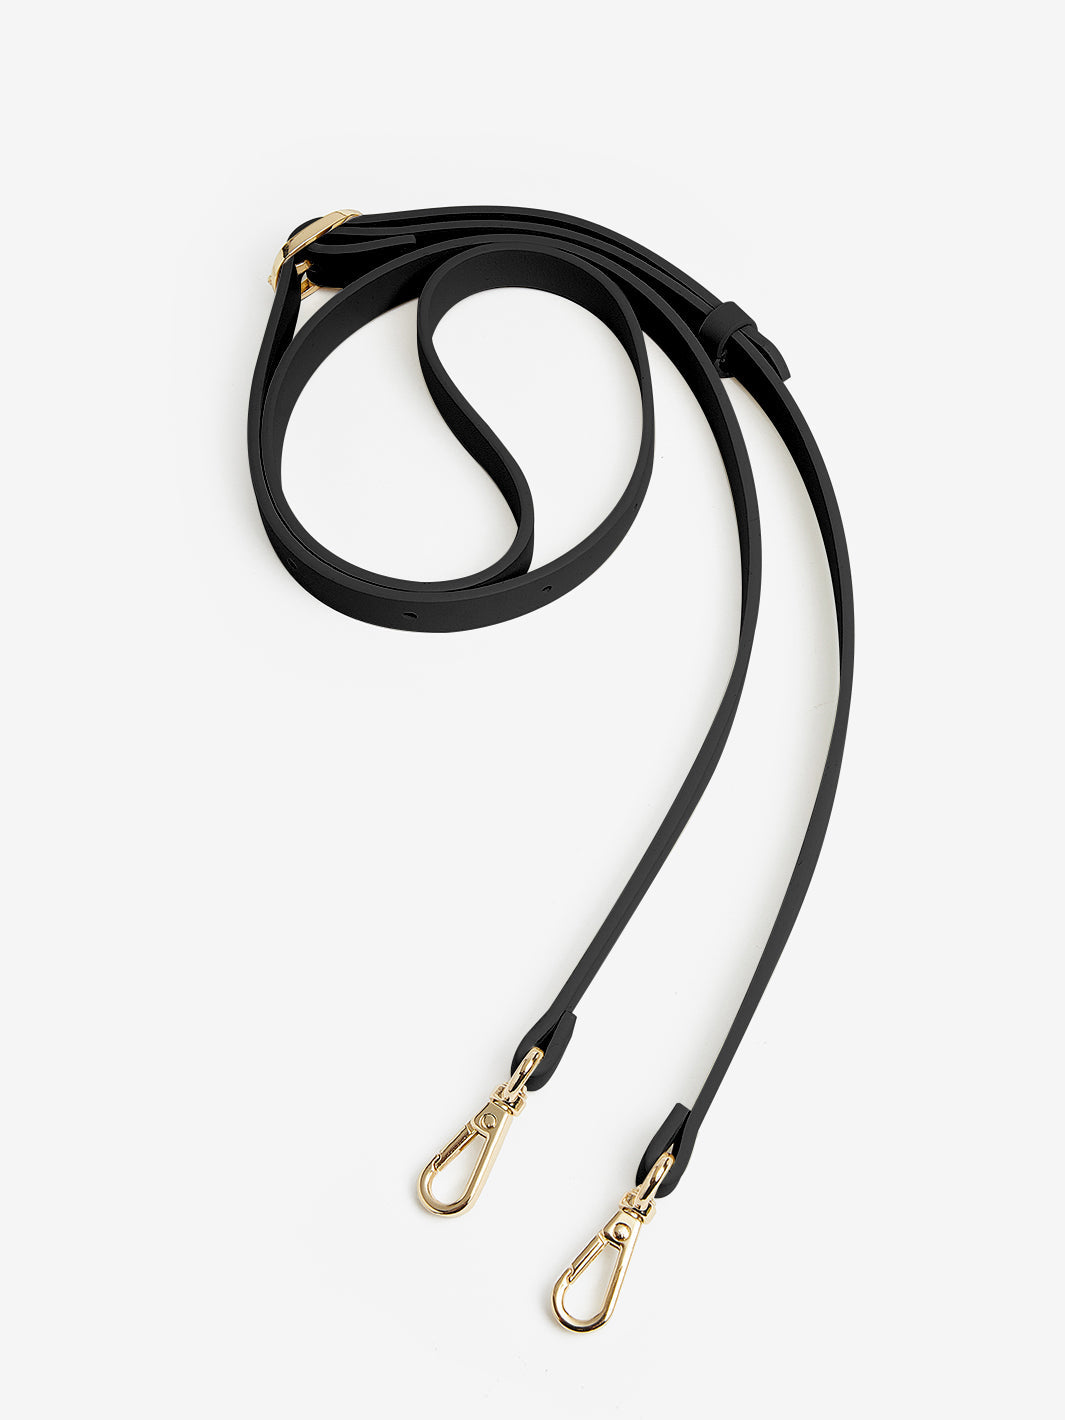 Common Crossbody Straps (No D-shaped buckles)